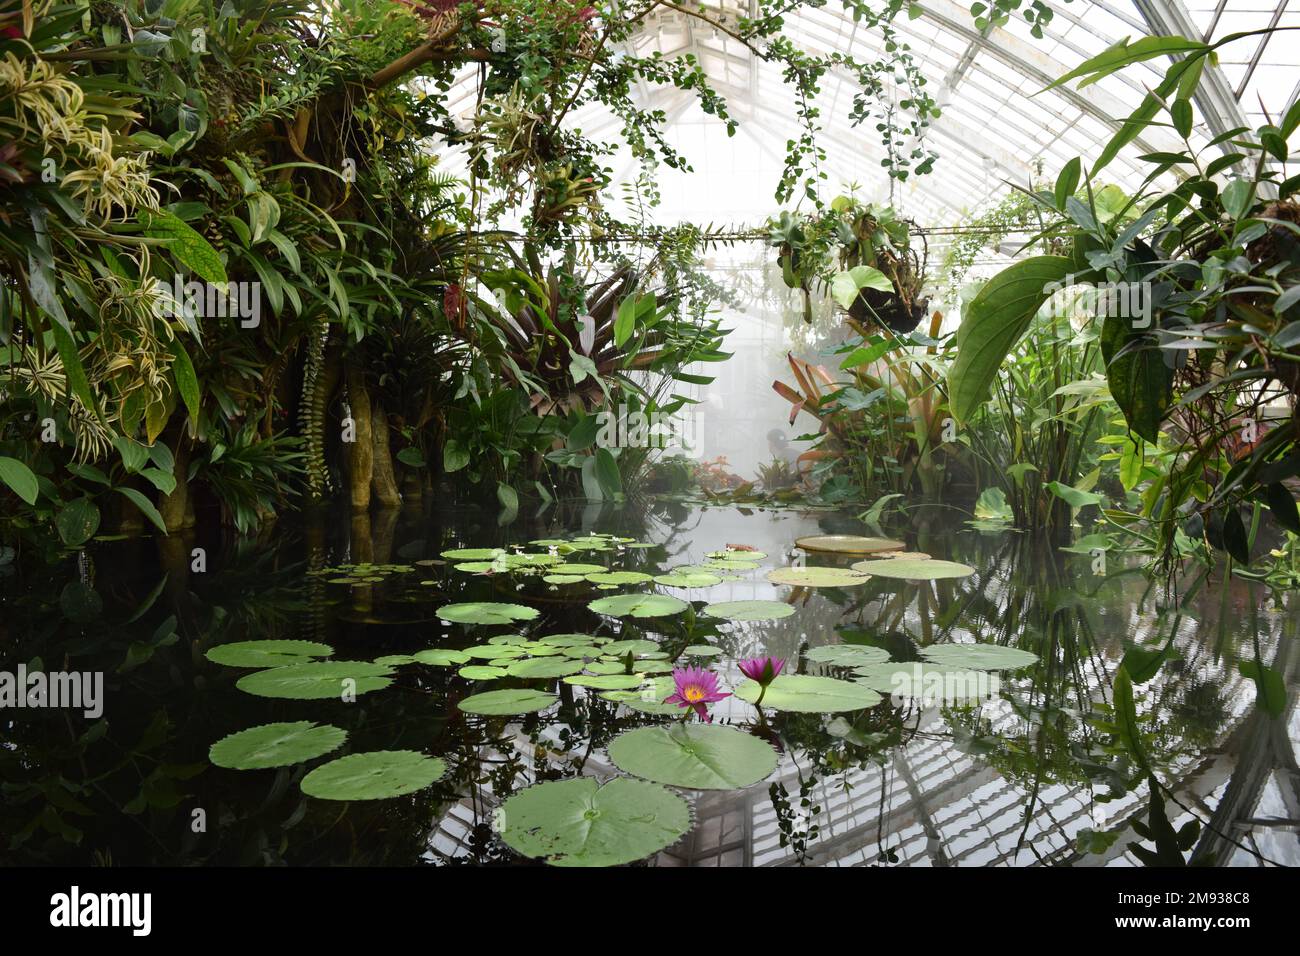 A beautiful pond at the Conservatory of Flowers in Golden Gate Park, San Francisco, California. Stock Photo